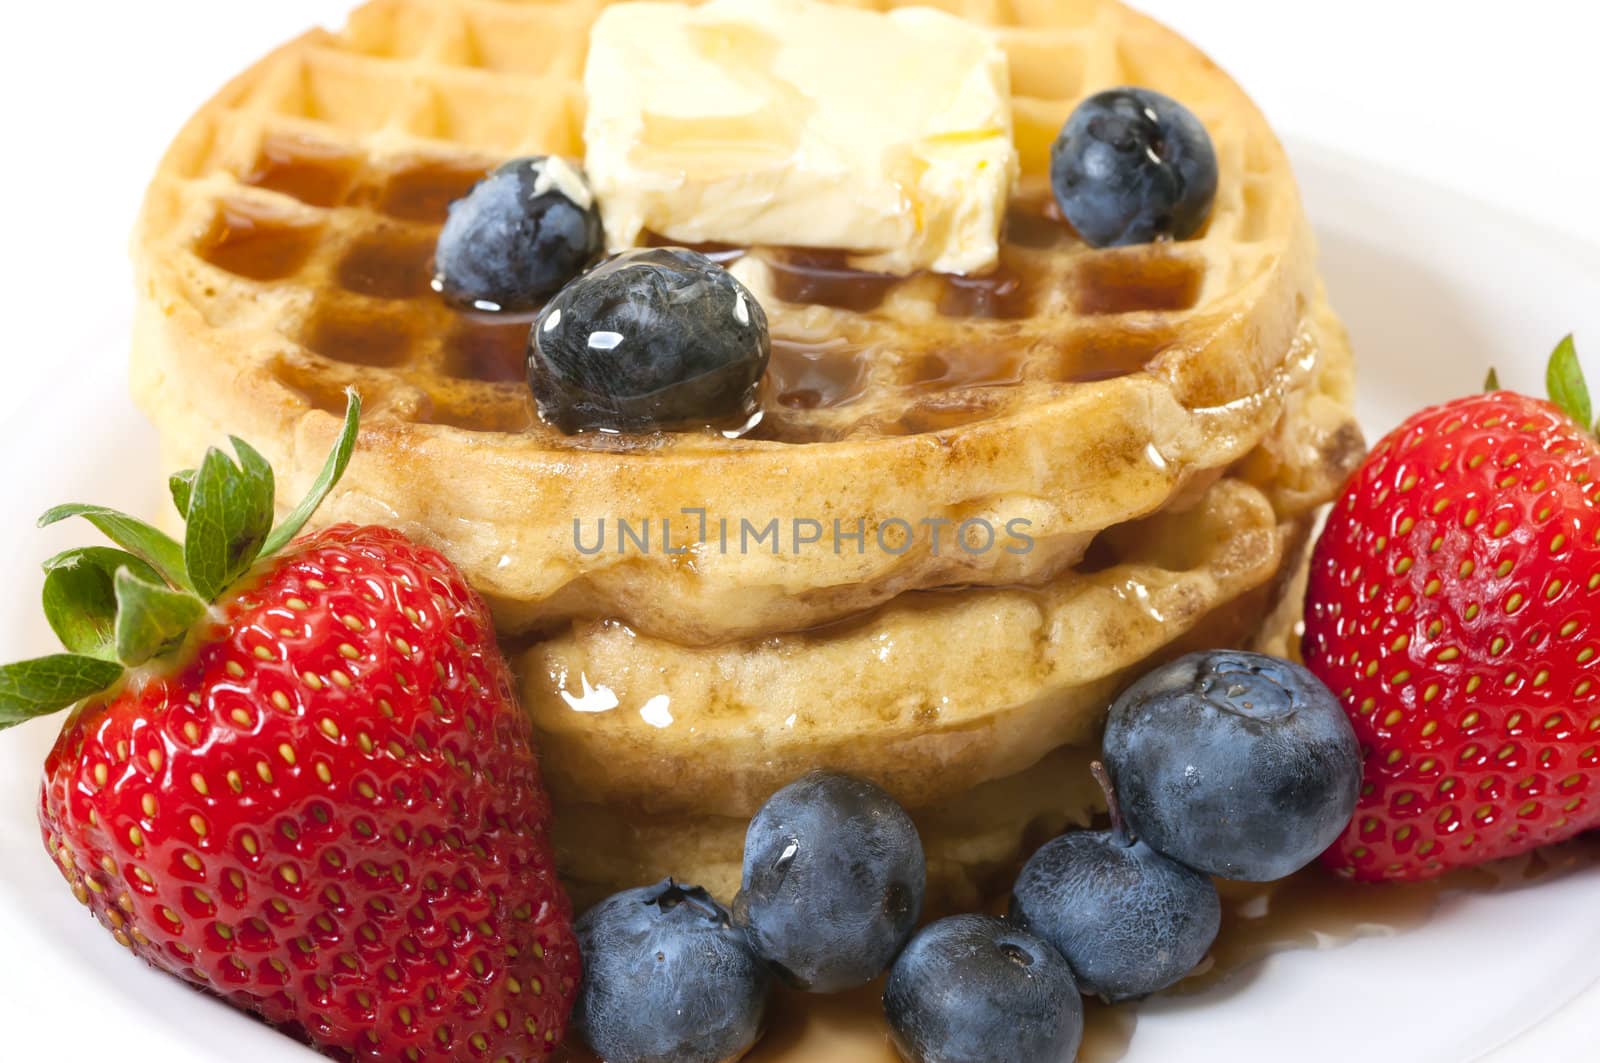 Closeup of waffles, strawberries, blueberries, and butter.   Isolated on white background.